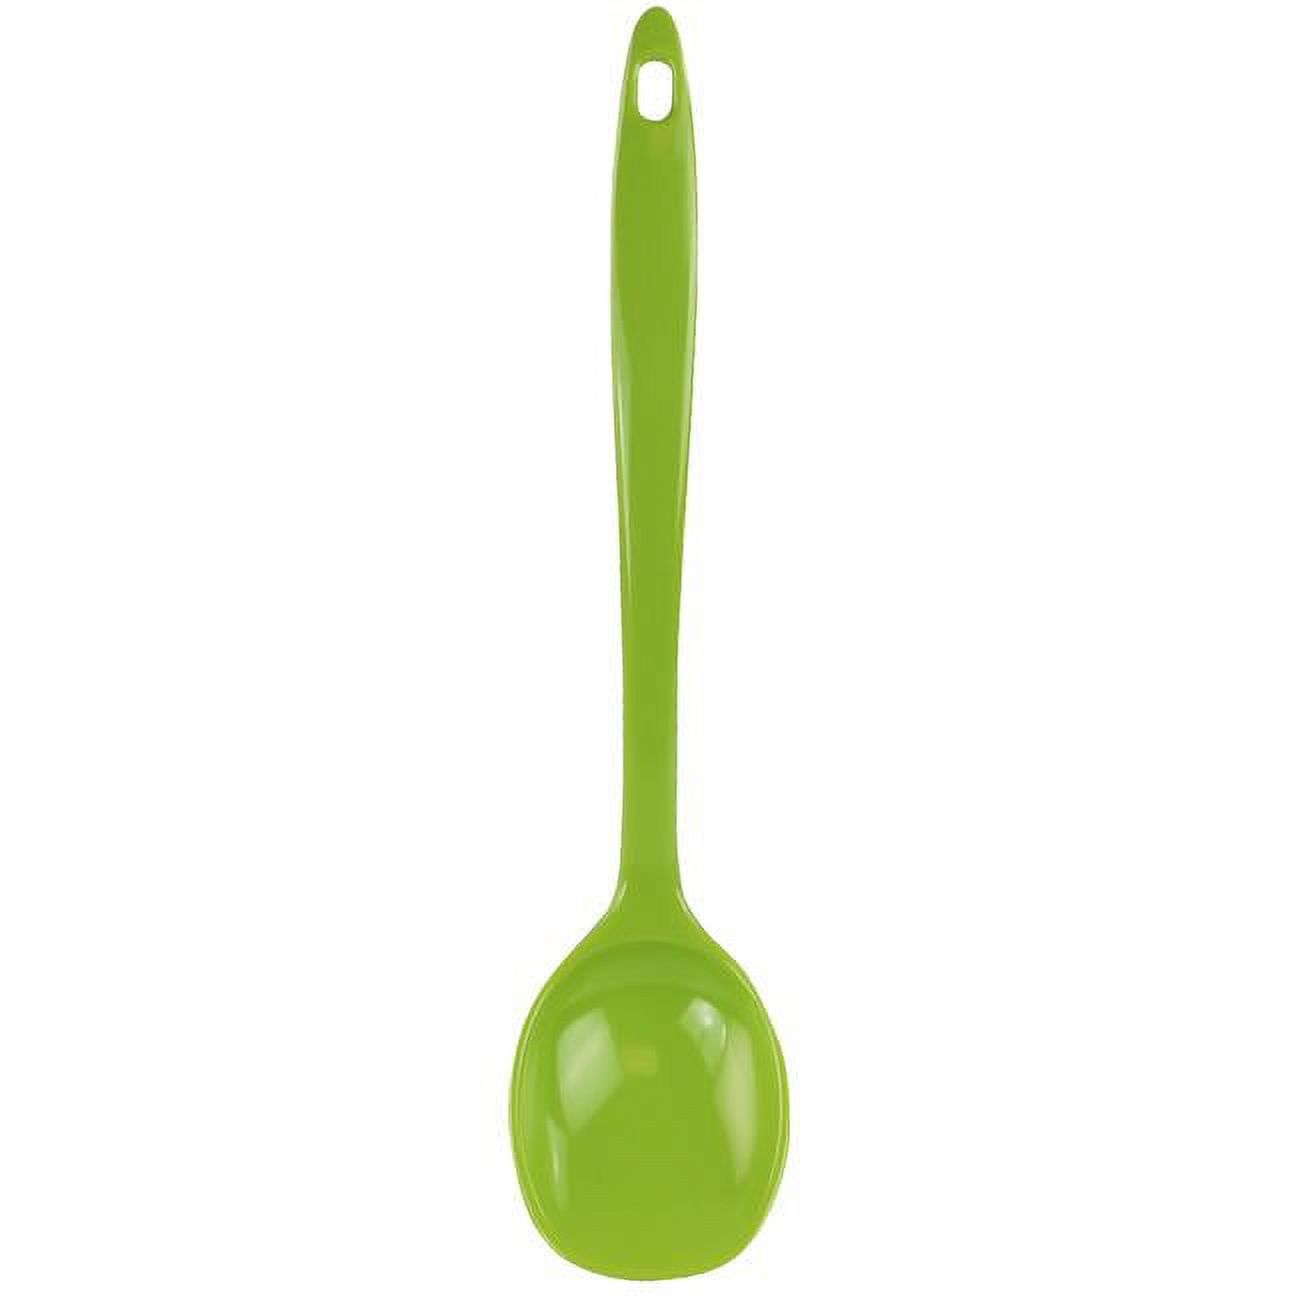 100% Organic Melamine Kitchen Cooking Spoon, Lime - image 1 of 2